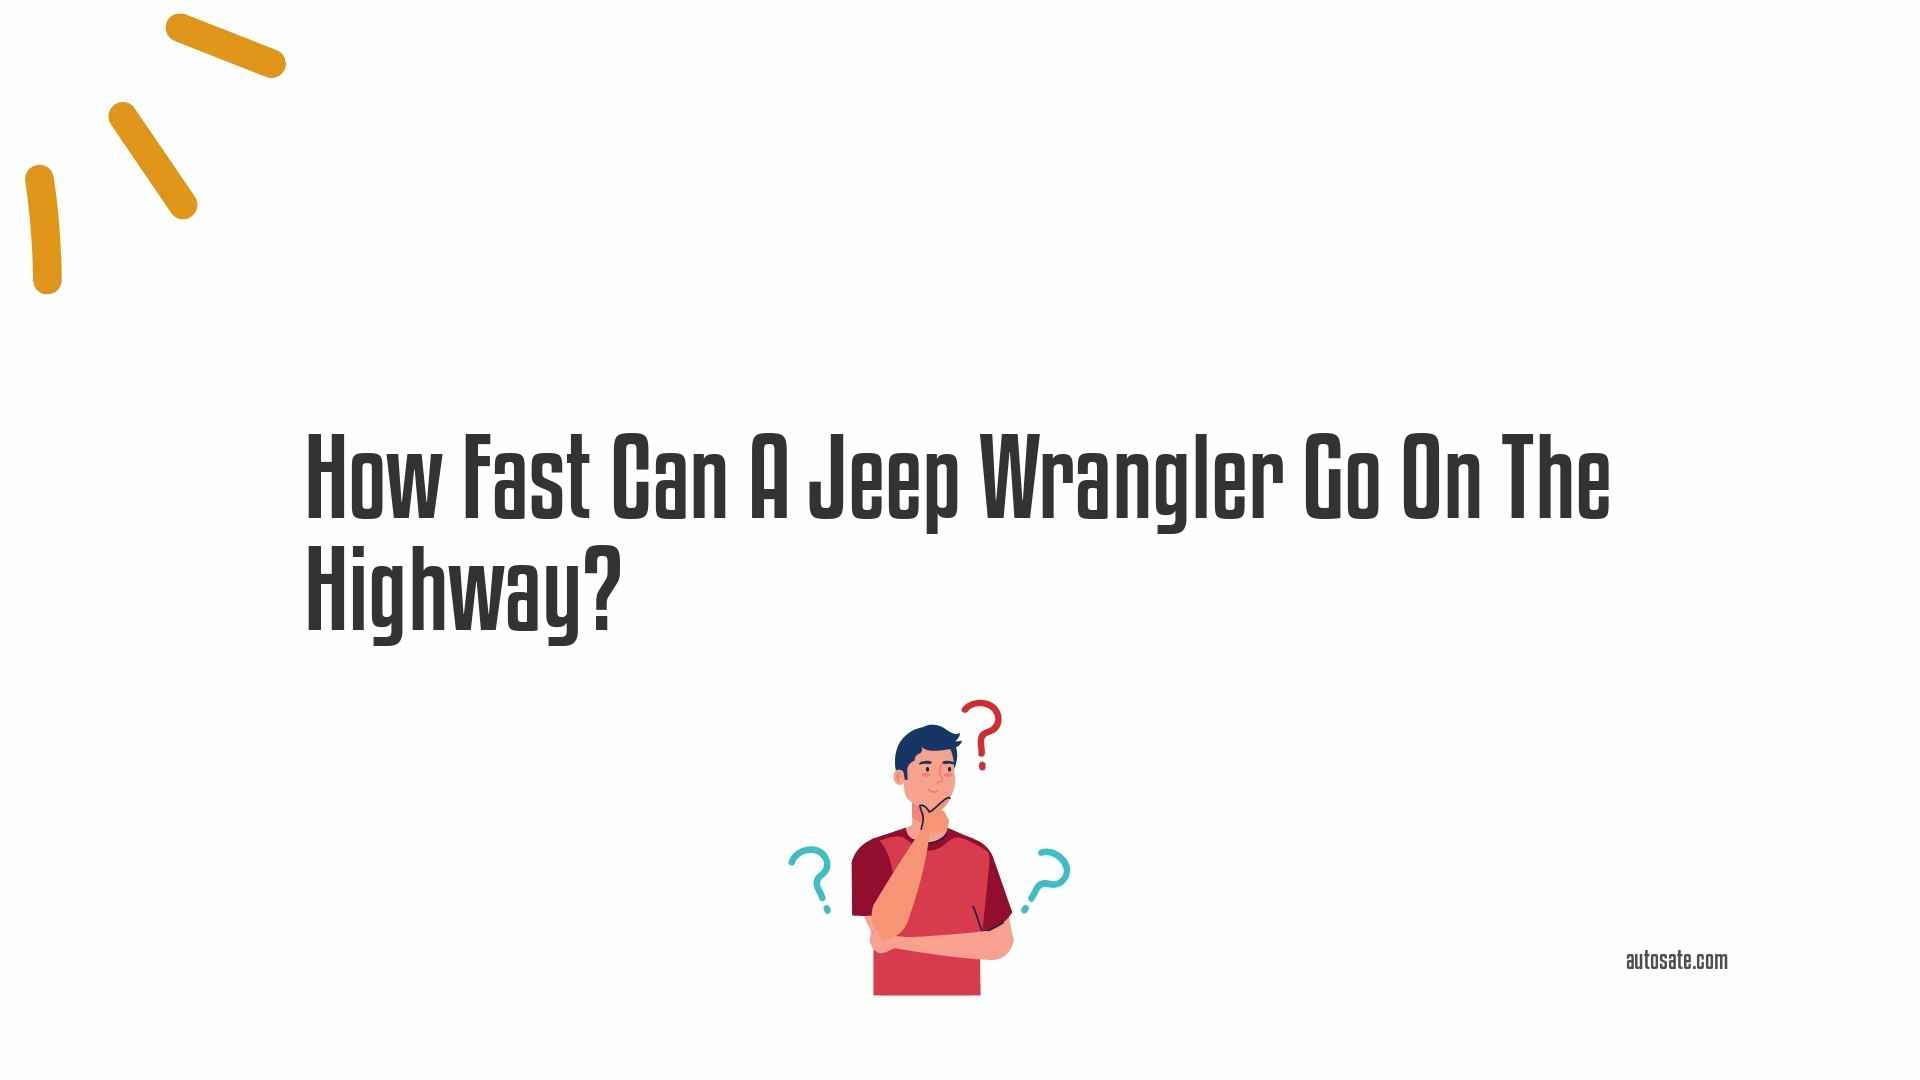 How Fast Can A Jeep Wrangler Go On The Highway?